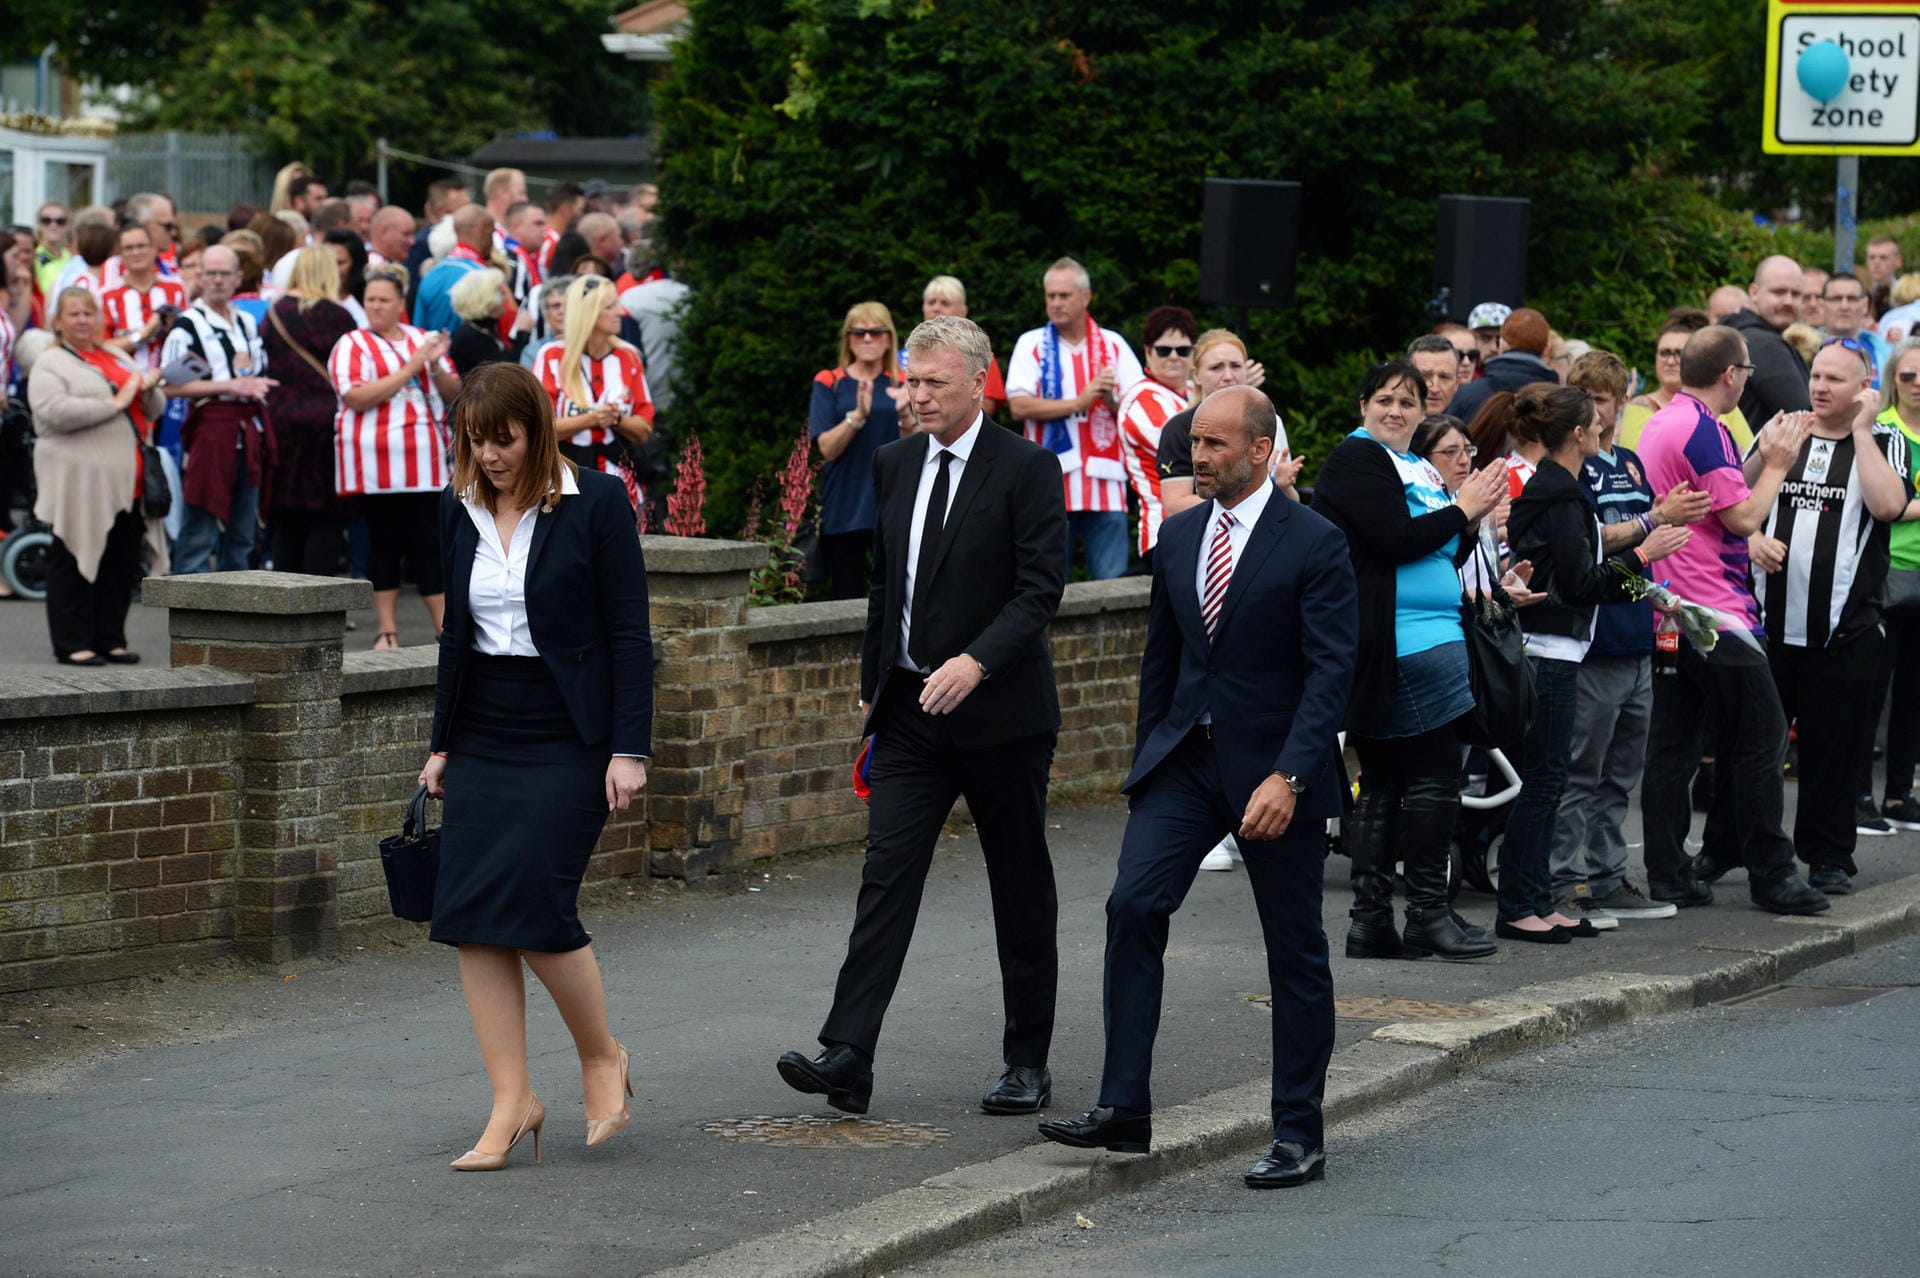 David Moyes departs St Joseph's Church after the funeral service of Bradley Lowery